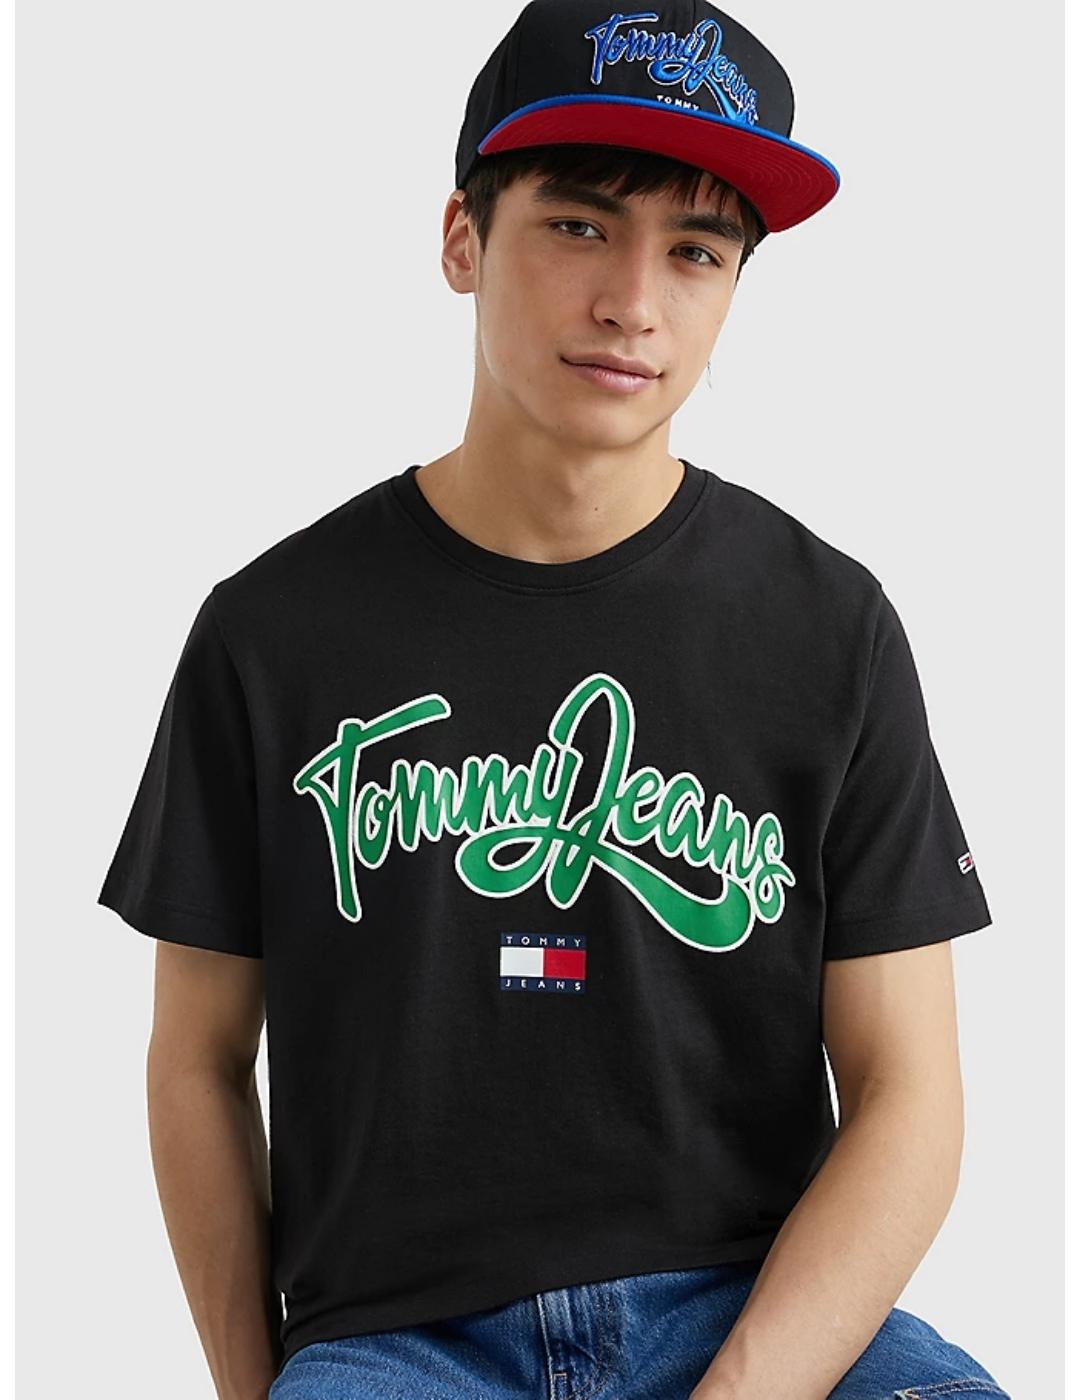 Camiseta Tommy Jeans college para hombre